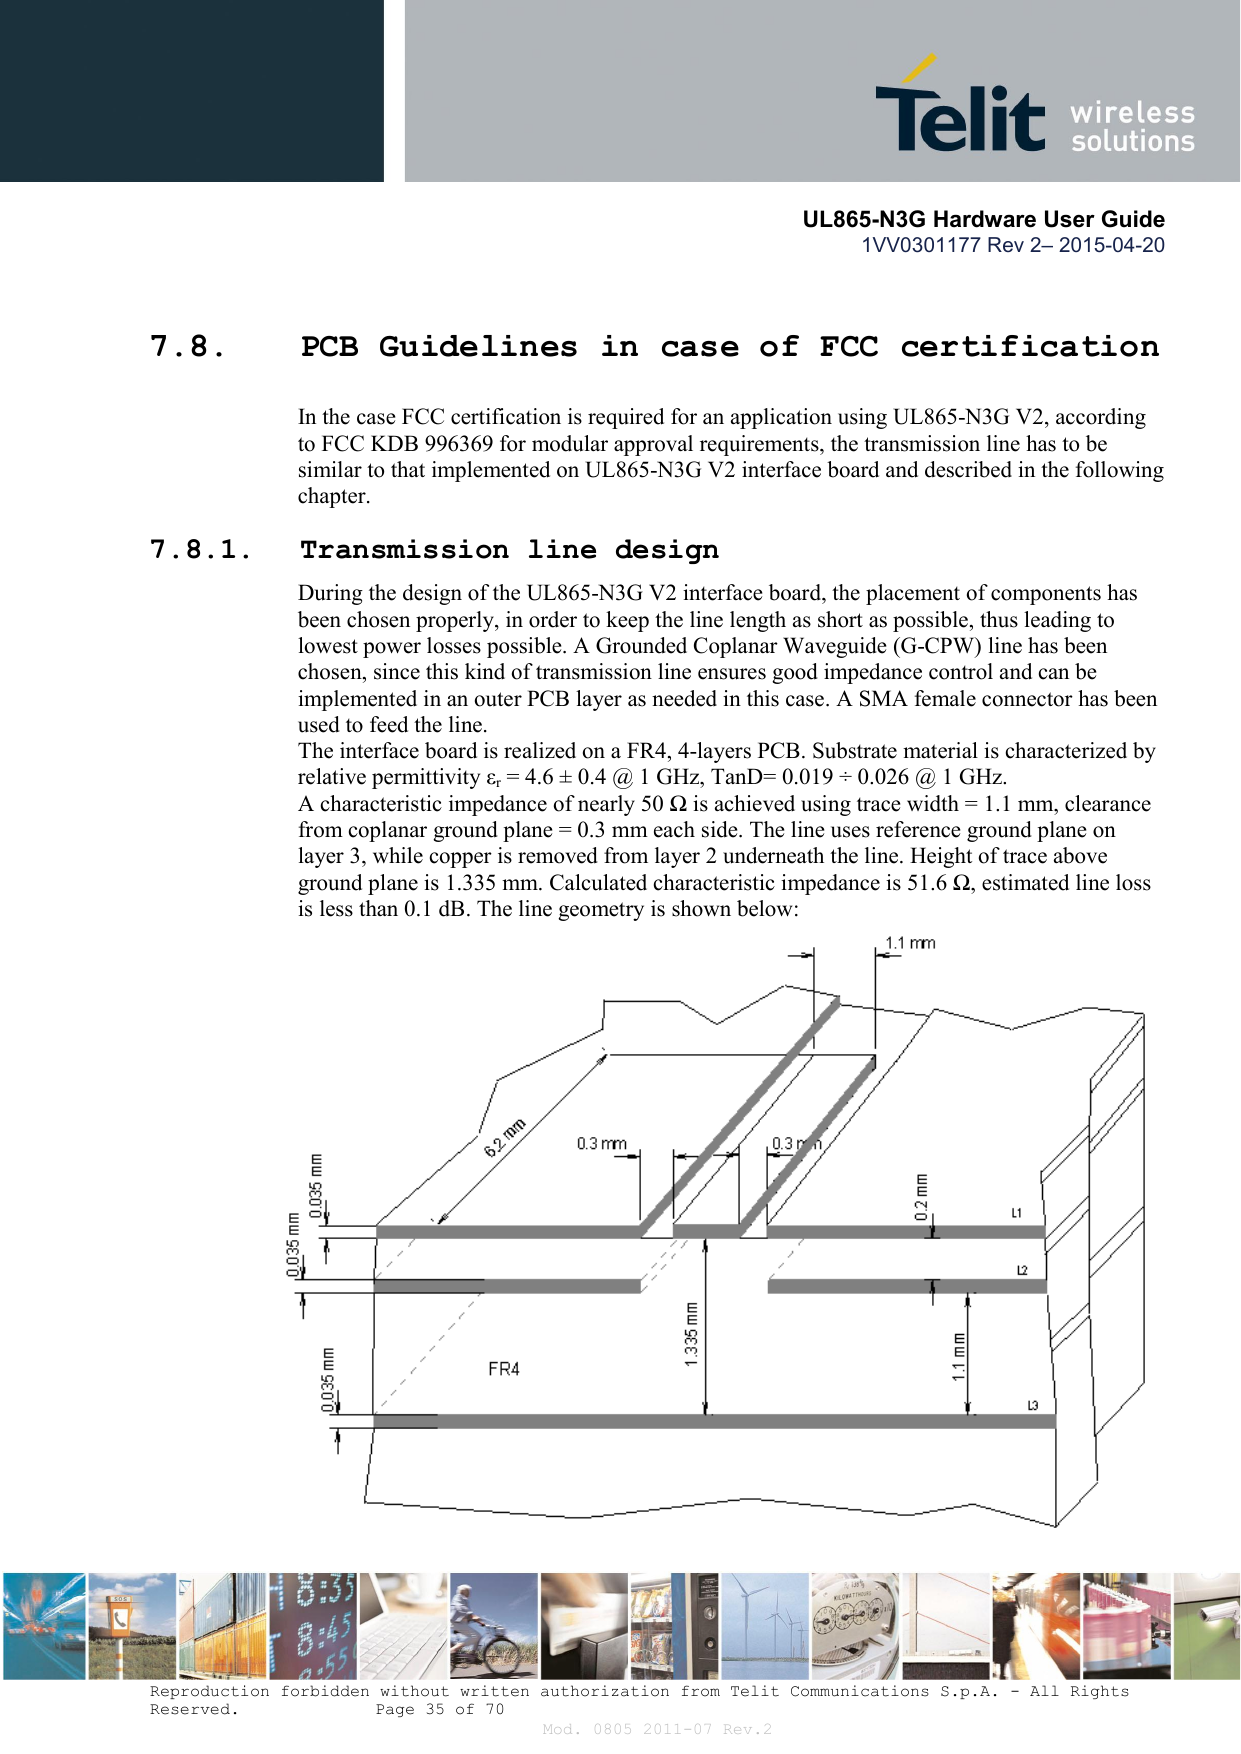       UL865-N3G Hardware User Guide 1VV0301177 Rev 2– 2015-04-20  Reproduction forbidden without written authorization from Telit Communications S.p.A. - All Rights Reserved.    Page 35 of 70 Mod. 0805 2011-07 Rev.2 7.8. PCB Guidelines in case of FCC certification In the case FCC certification is required for an application using UL865-N3G V2, according to FCC KDB 996369 for modular approval requirements, the transmission line has to be similar to that implemented on UL865-N3G V2 interface board and described in the following chapter. 7.8.1. Transmission line design During the design of the UL865-N3G V2 interface board, the placement of components has been chosen properly, in order to keep the line length as short as possible, thus leading to lowest power losses possible. A Grounded Coplanar Waveguide (G-CPW) line has been chosen, since this kind of transmission line ensures good impedance control and can be implemented in an outer PCB layer as needed in this case. A SMA female connector has been used to feed the line. The interface board is realized on a FR4, 4-layers PCB. Substrate material is characterized by relative permittivity εr = 4.6 ± 0.4 @ 1 GHz, TanD= 0.019 ÷ 0.026 @ 1 GHz. A characteristic impedance of nearly 50 Ω is achieved using trace width = 1.1 mm, clearance from coplanar ground plane = 0.3 mm each side. The line uses reference ground plane on layer 3, while copper is removed from layer 2 underneath the line. Height of trace above ground plane is 1.335 mm. Calculated characteristic impedance is 51.6 Ω, estimated line loss  is less than 0.1 dB. The line geometry is shown below:                         